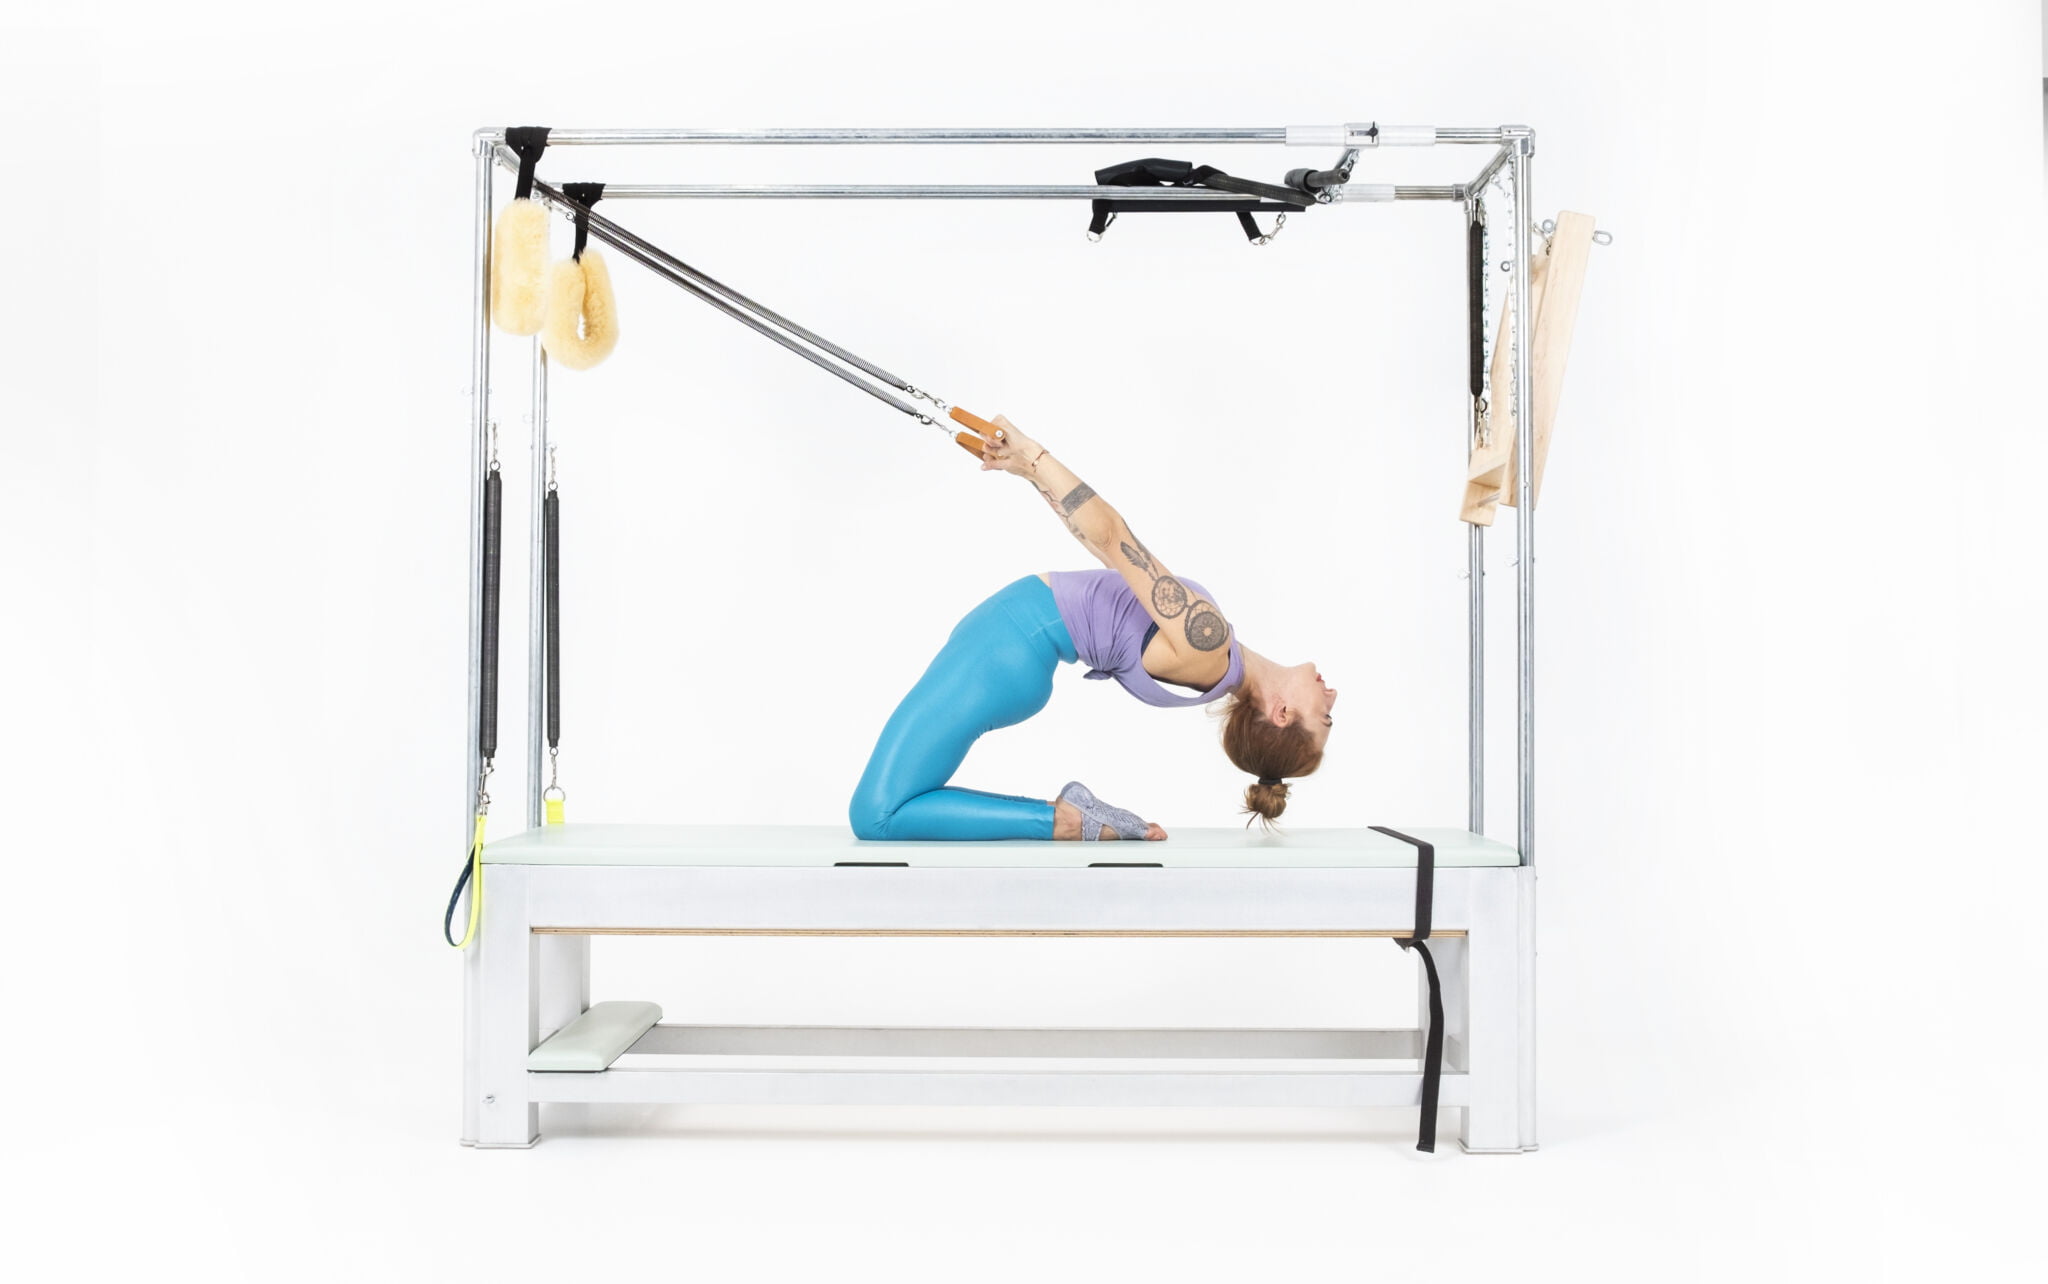 Thigh-Stretch-with-Arm-Springs-on-the-Cadillac-or-Tower-Online-Pilates-Classes-scaled